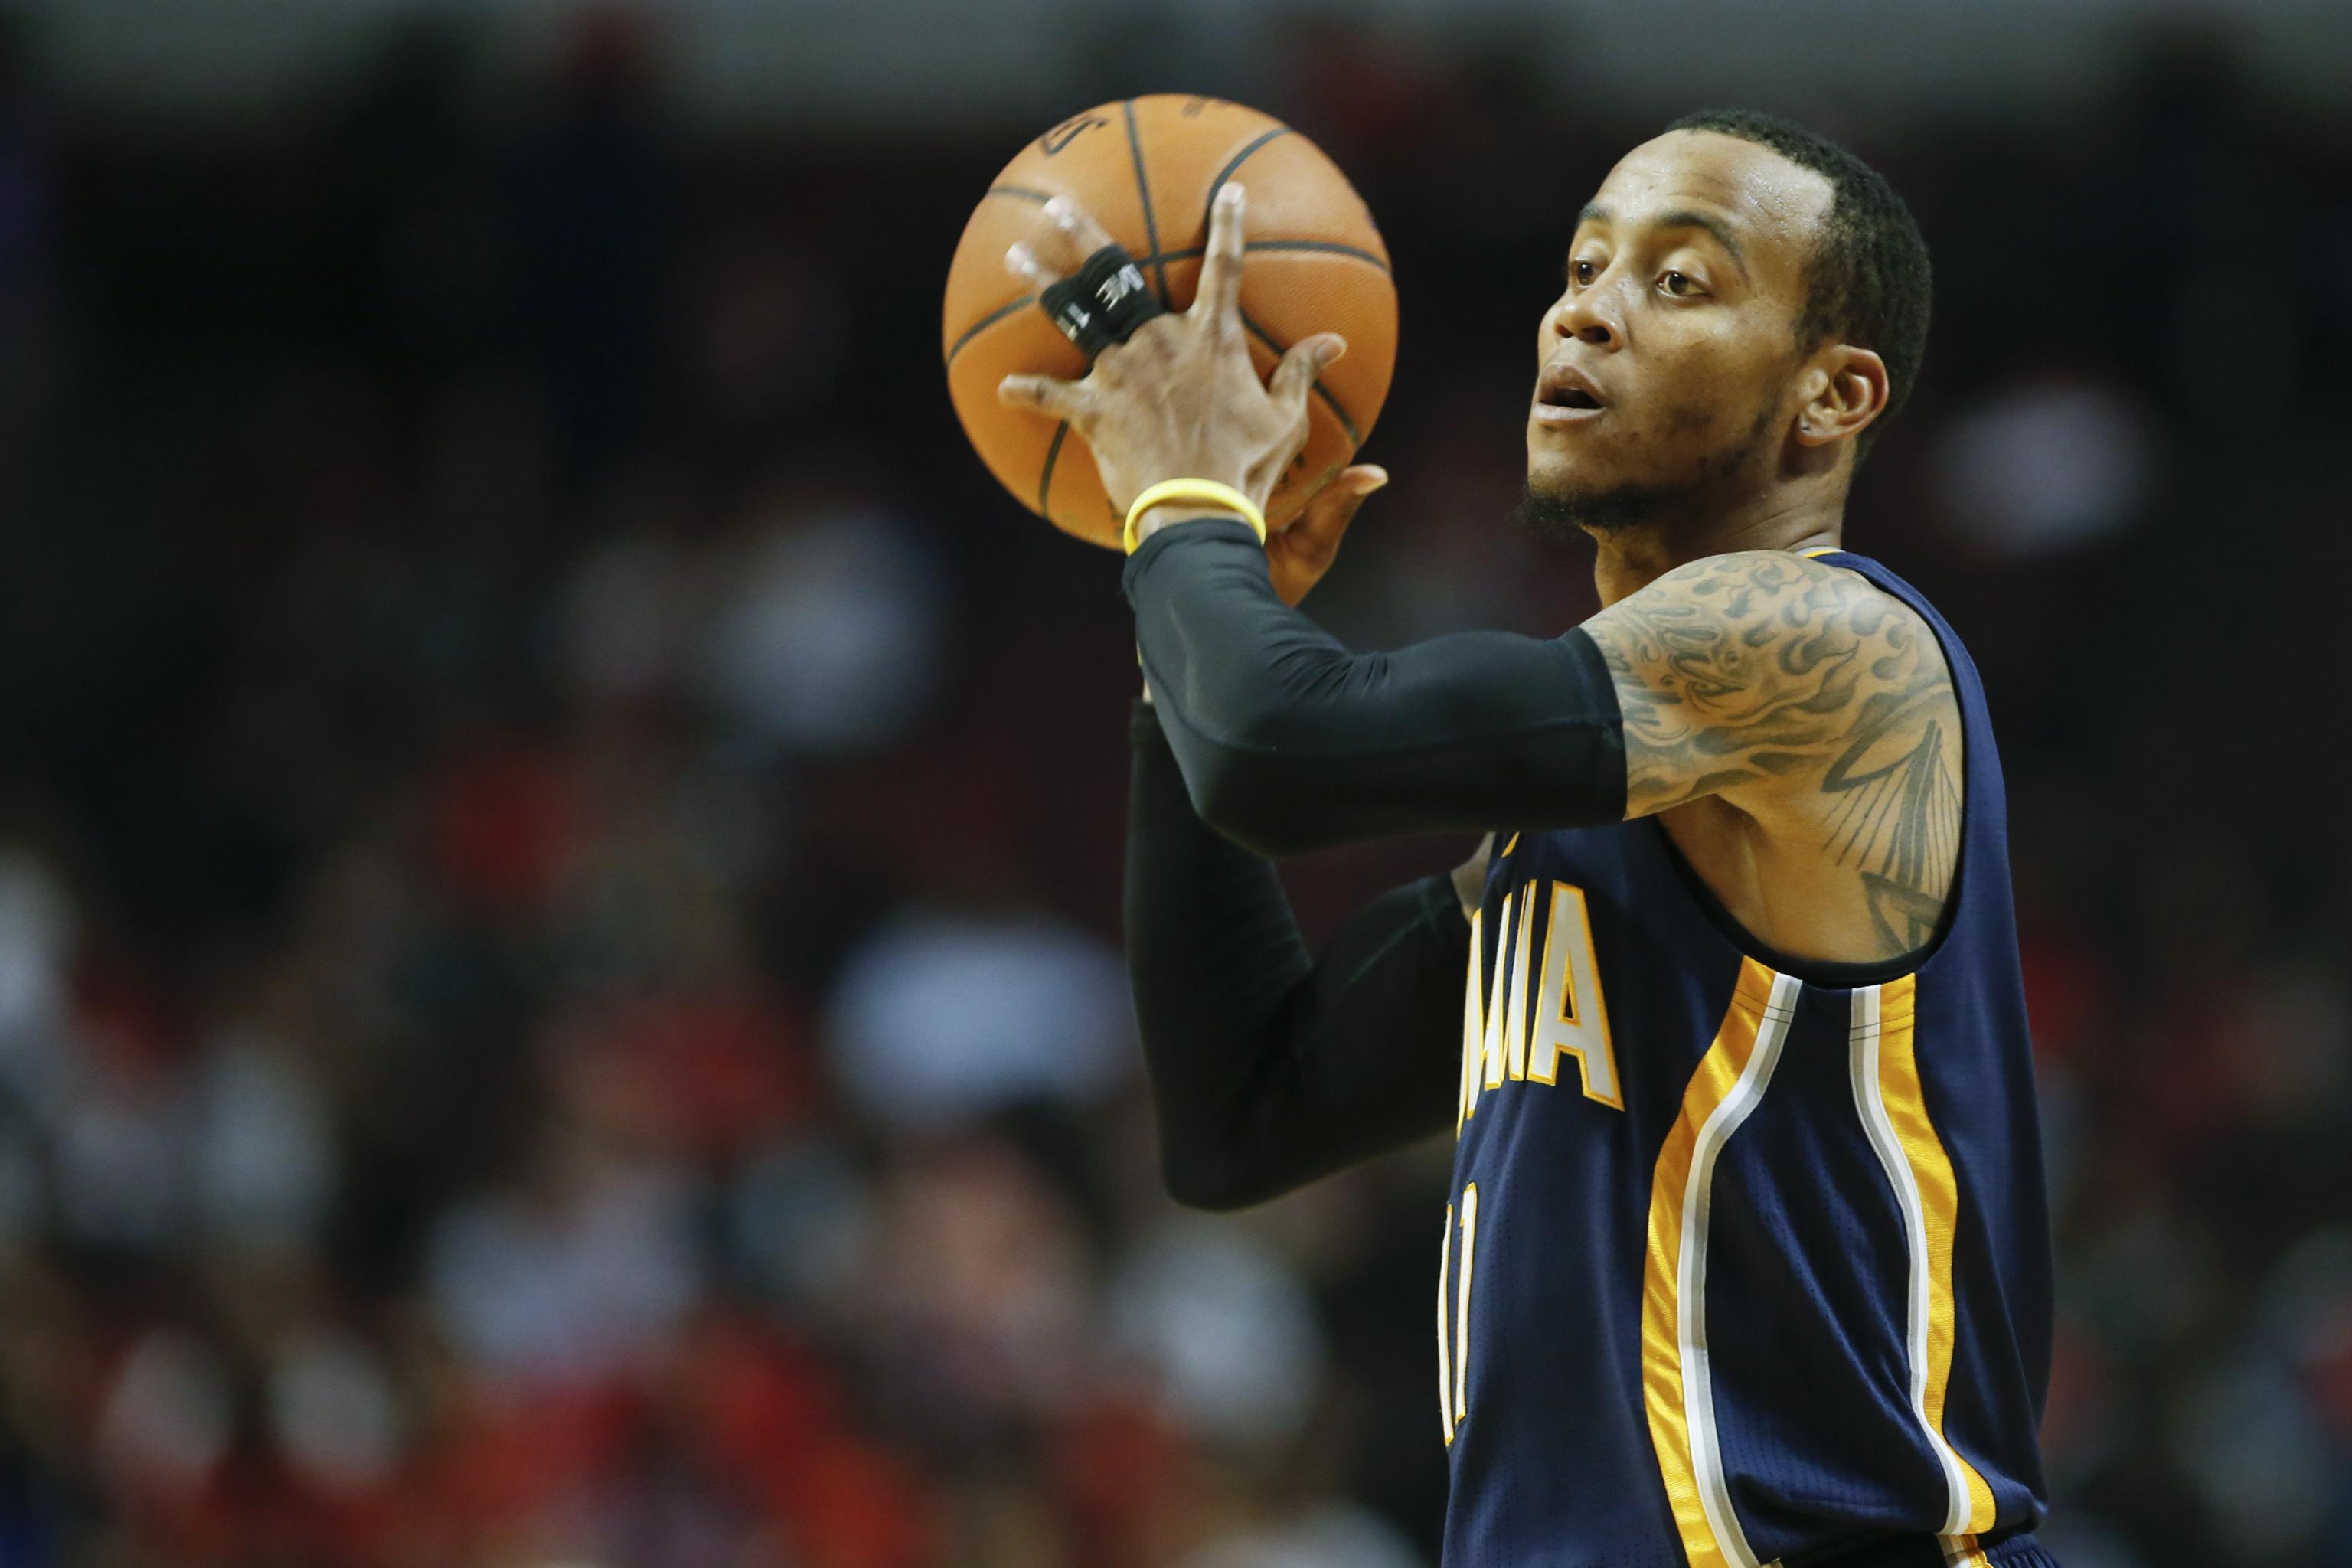 What If: 2013-14 Monta Ellis would fill a much needed role on the